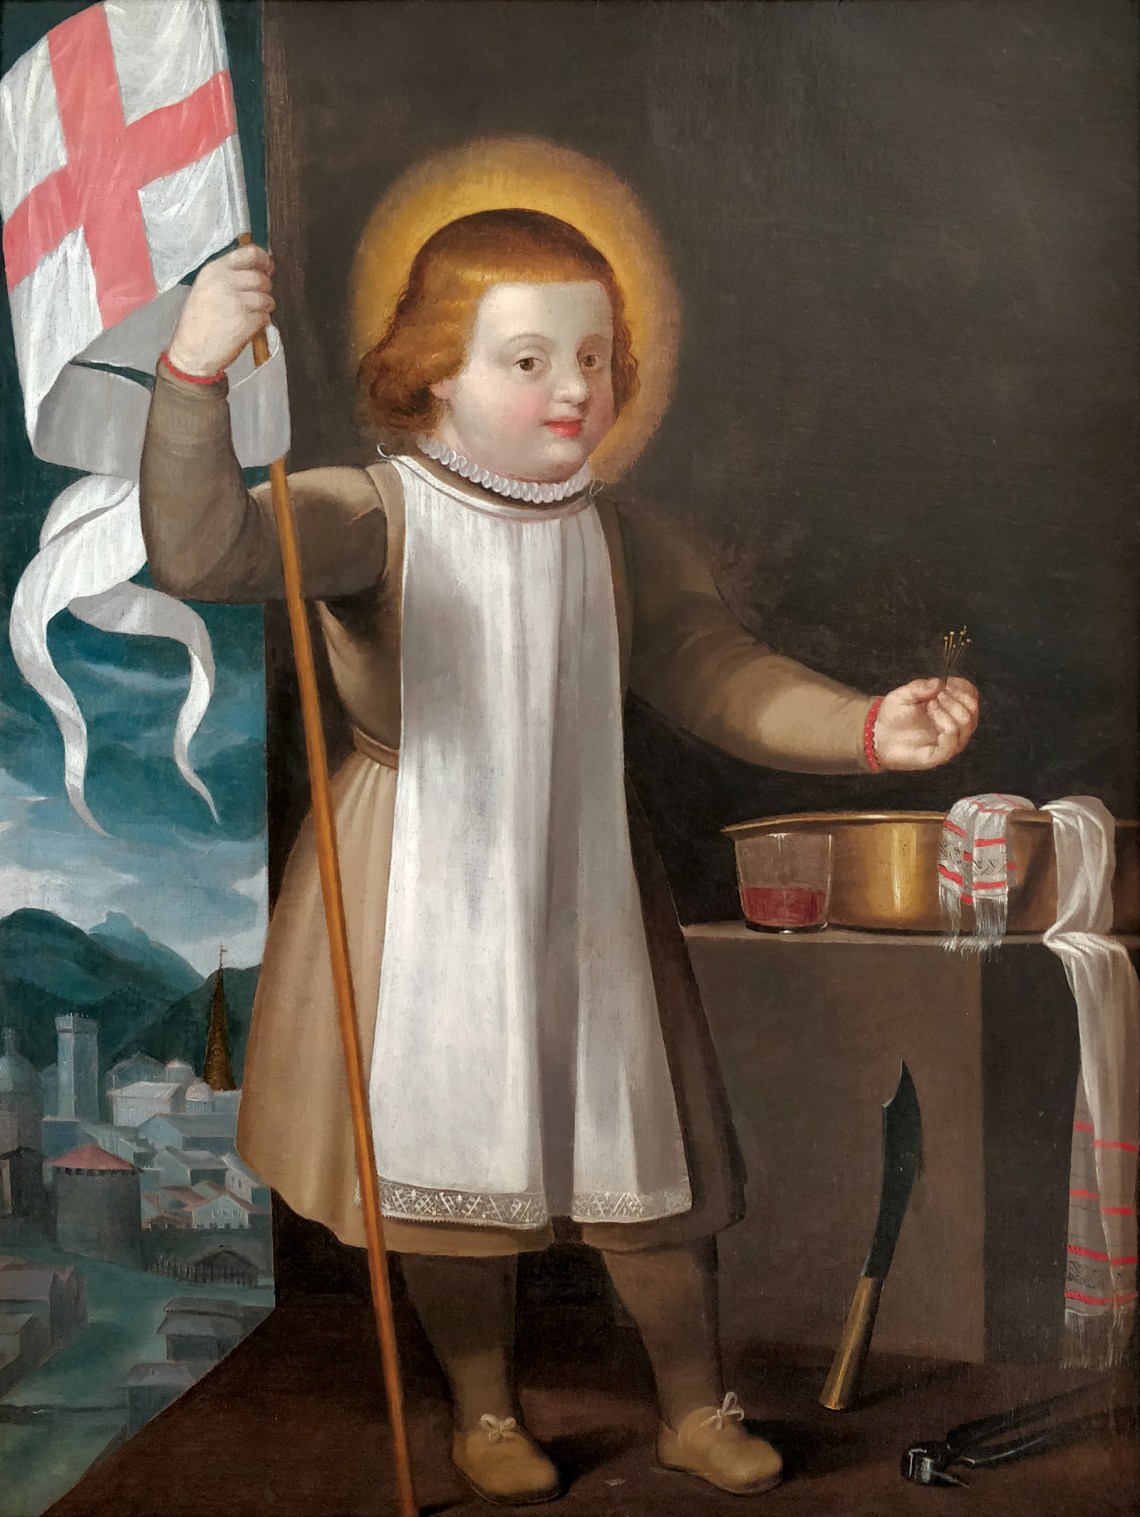 Simon of Trent with the symbols of his supposed martyrdom